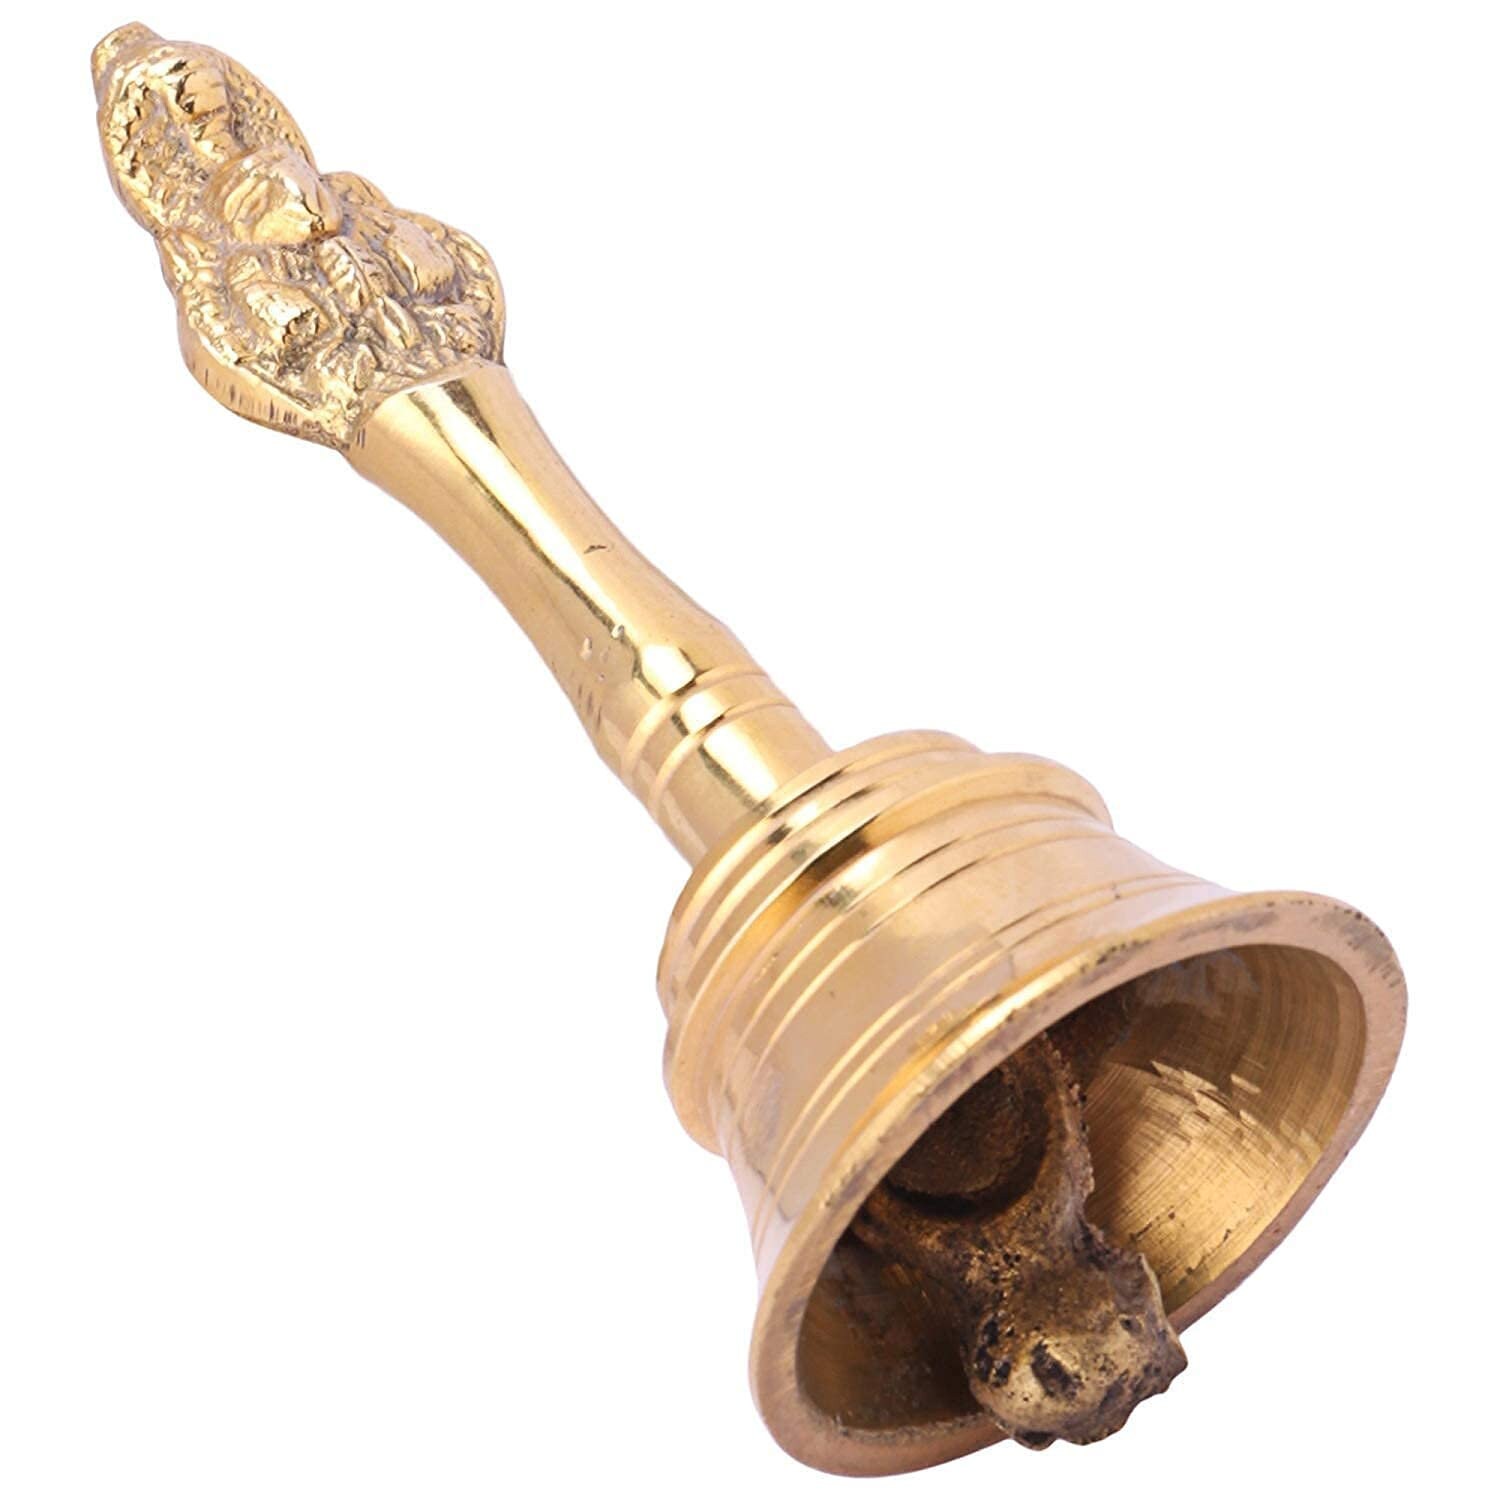 Silver Bell for Pooja - Ghanti - 3.1 inches Height - Medium Size